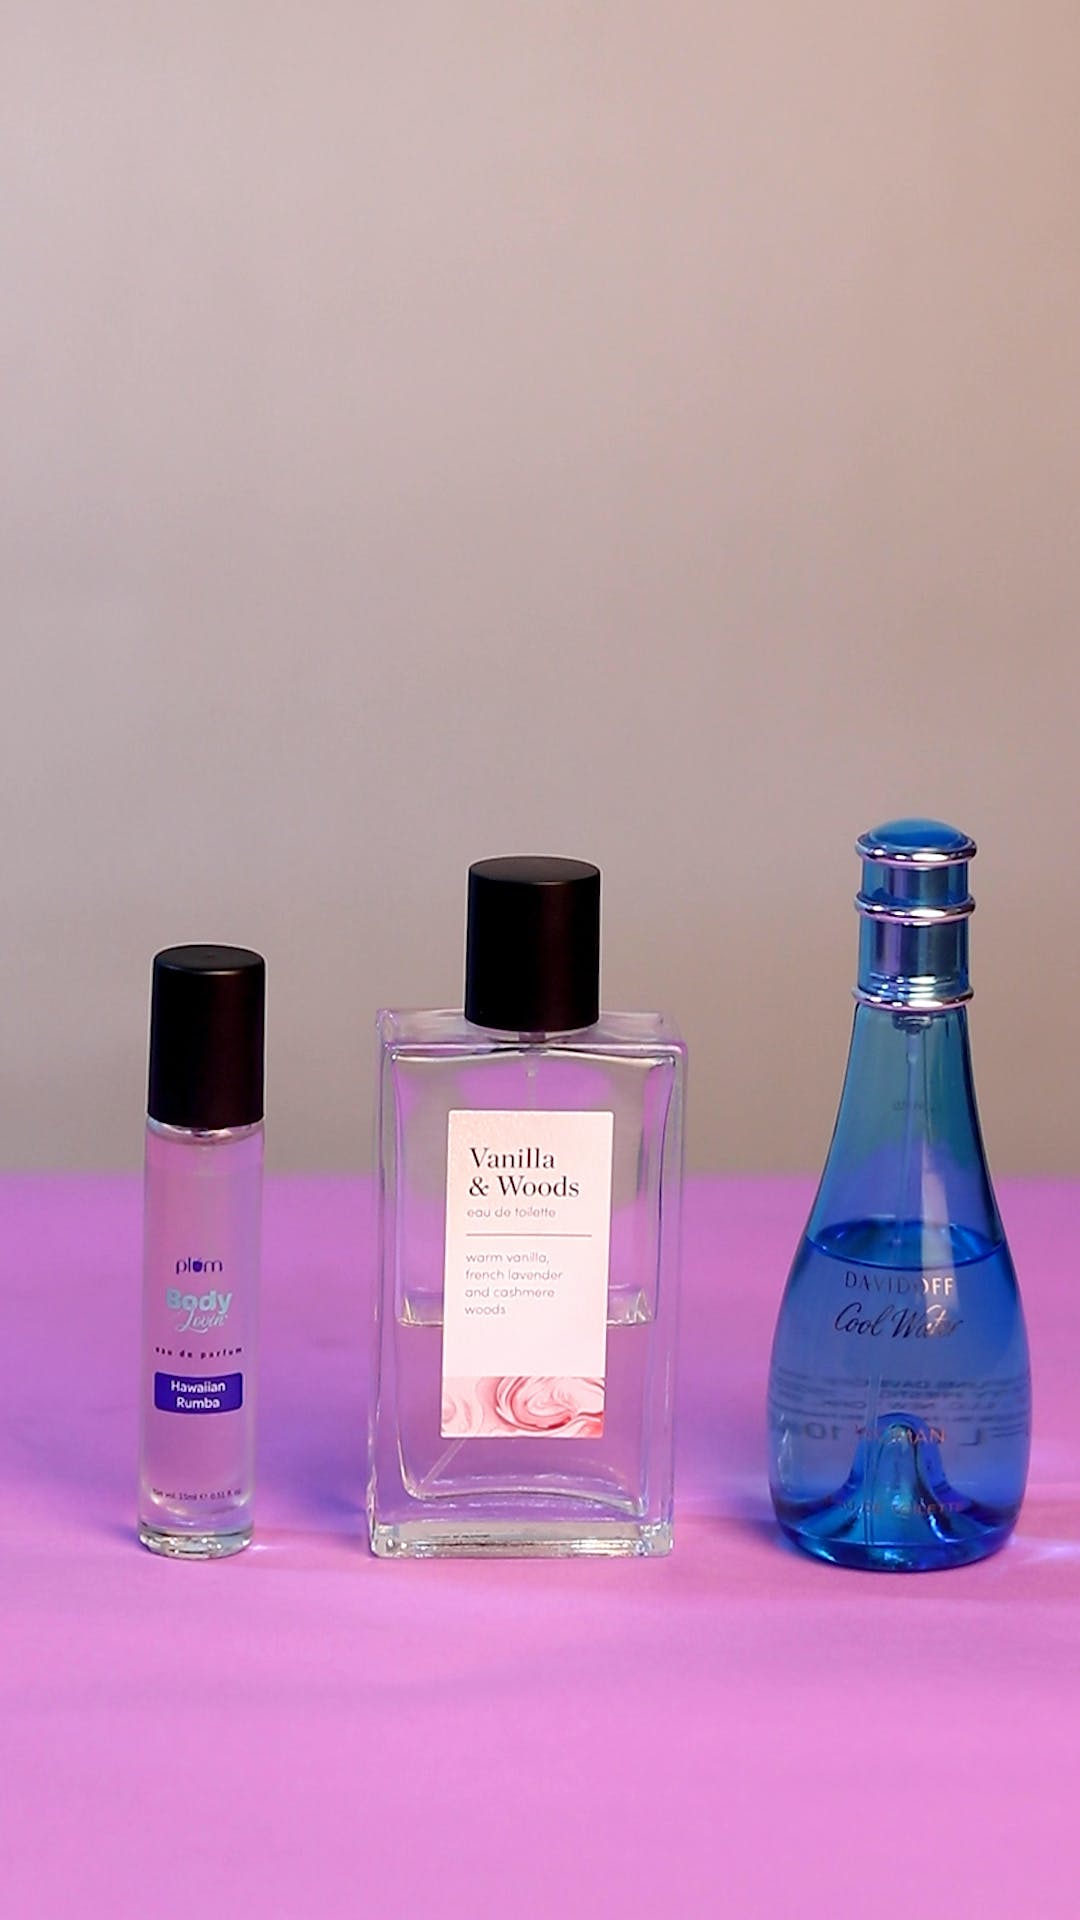 Liquid,Bottle,Solution,Cosmetics,Purple,Fluid,Personal care,Glass bottle,Violet,Tints and shades